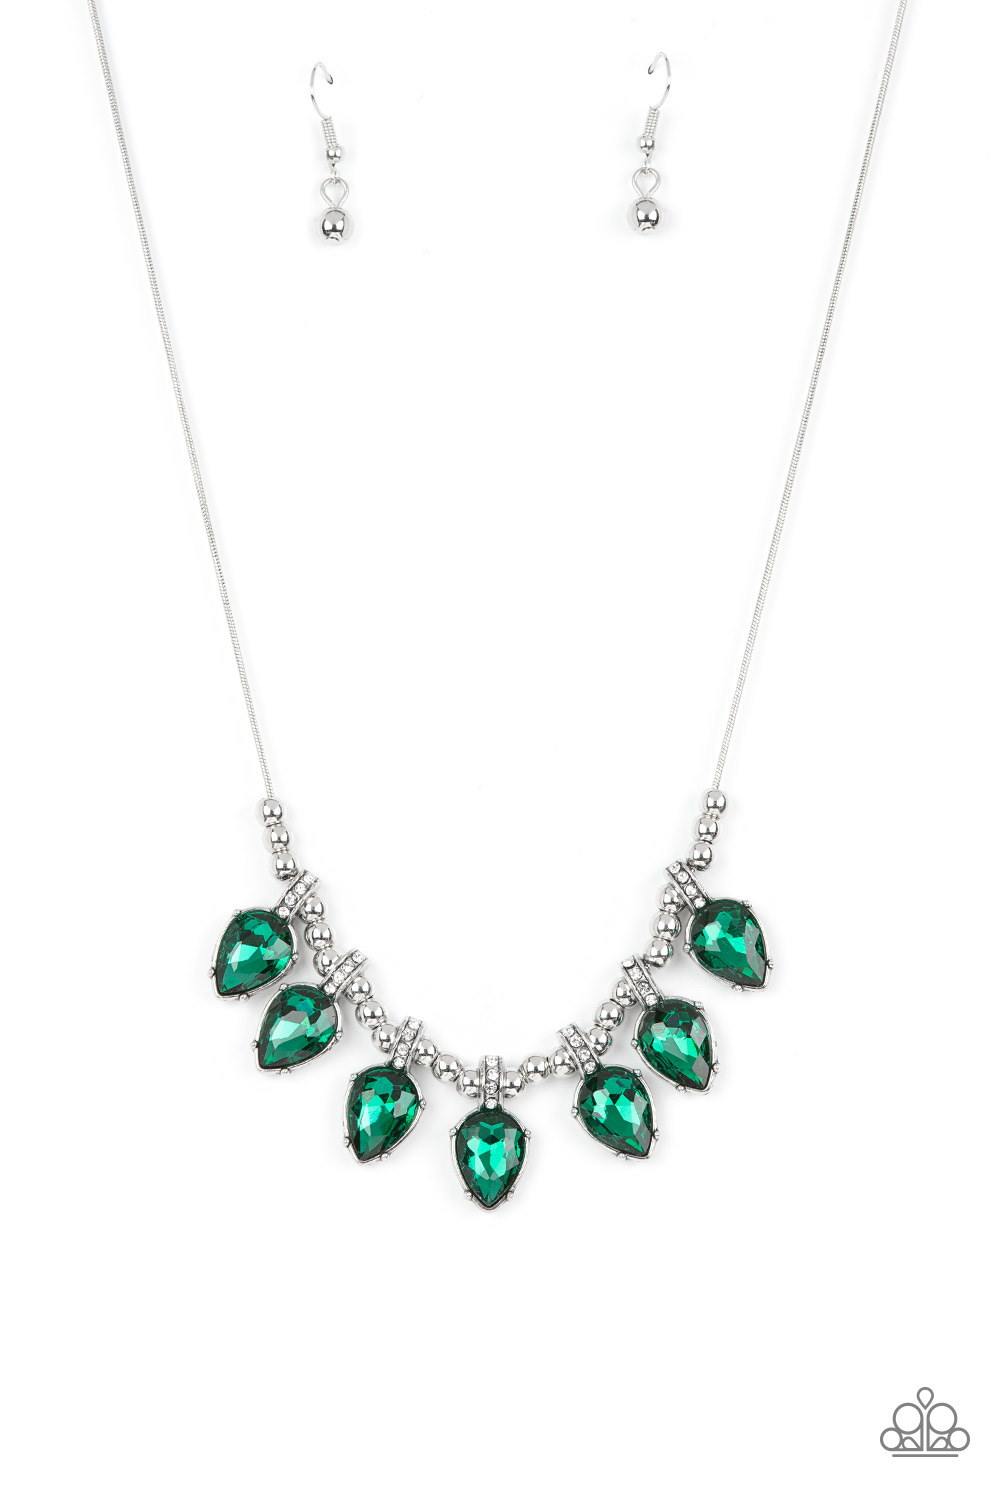 Necklace - Crown Jewel Couture - Green